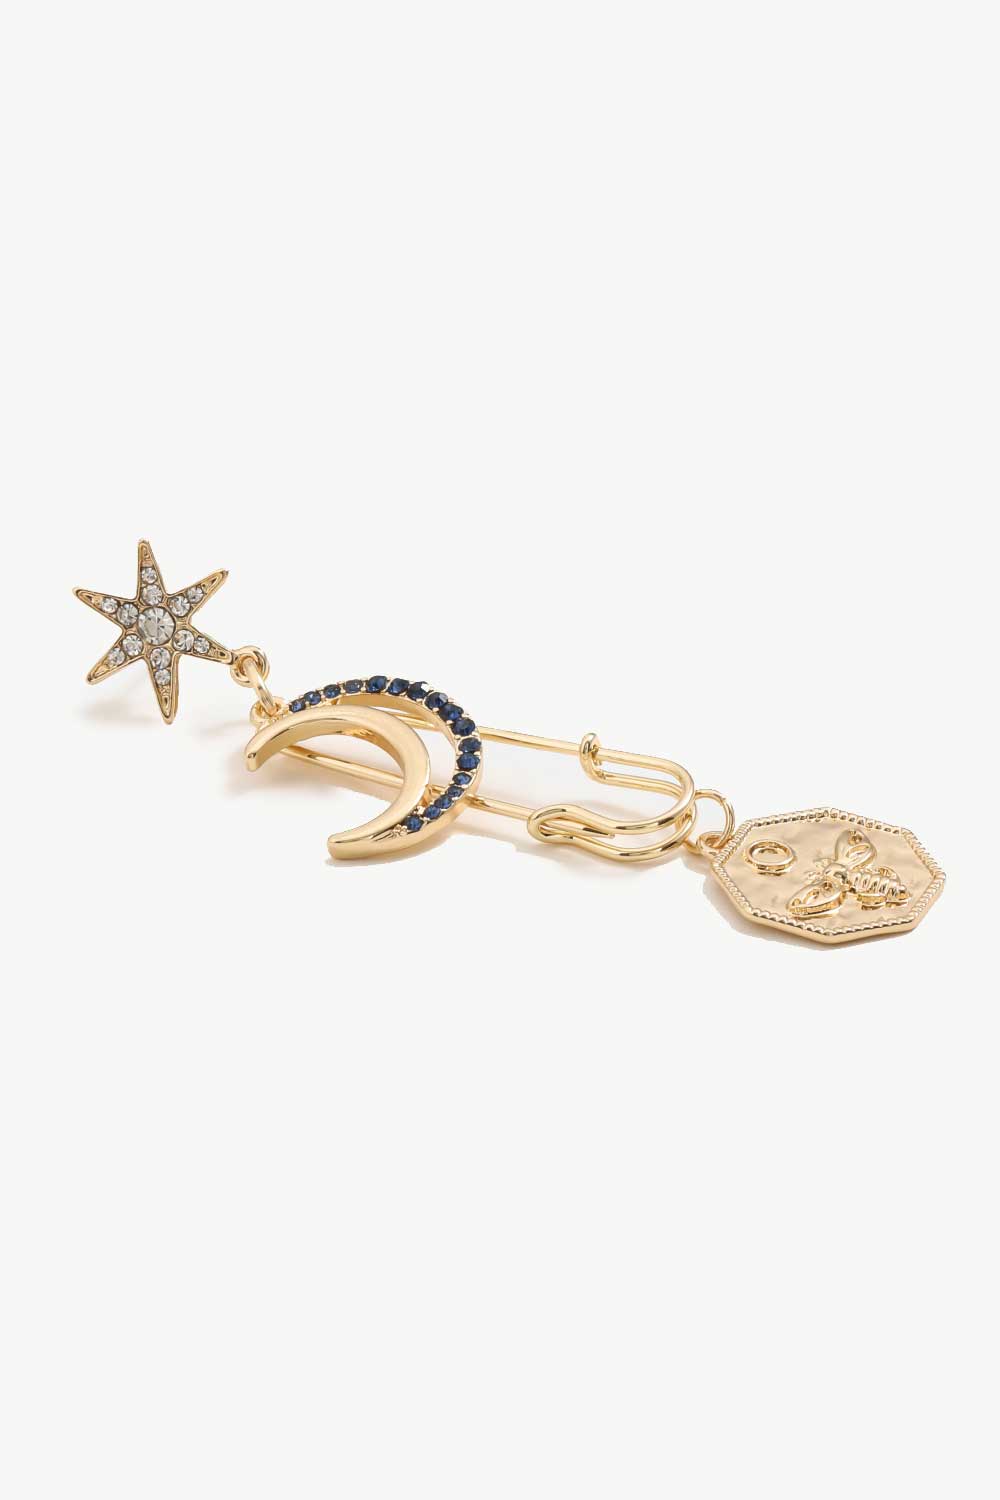 Inlaid Rhinestone Moon and Star Drop Earrings -  Nueva Moda Boutique By Giselly 